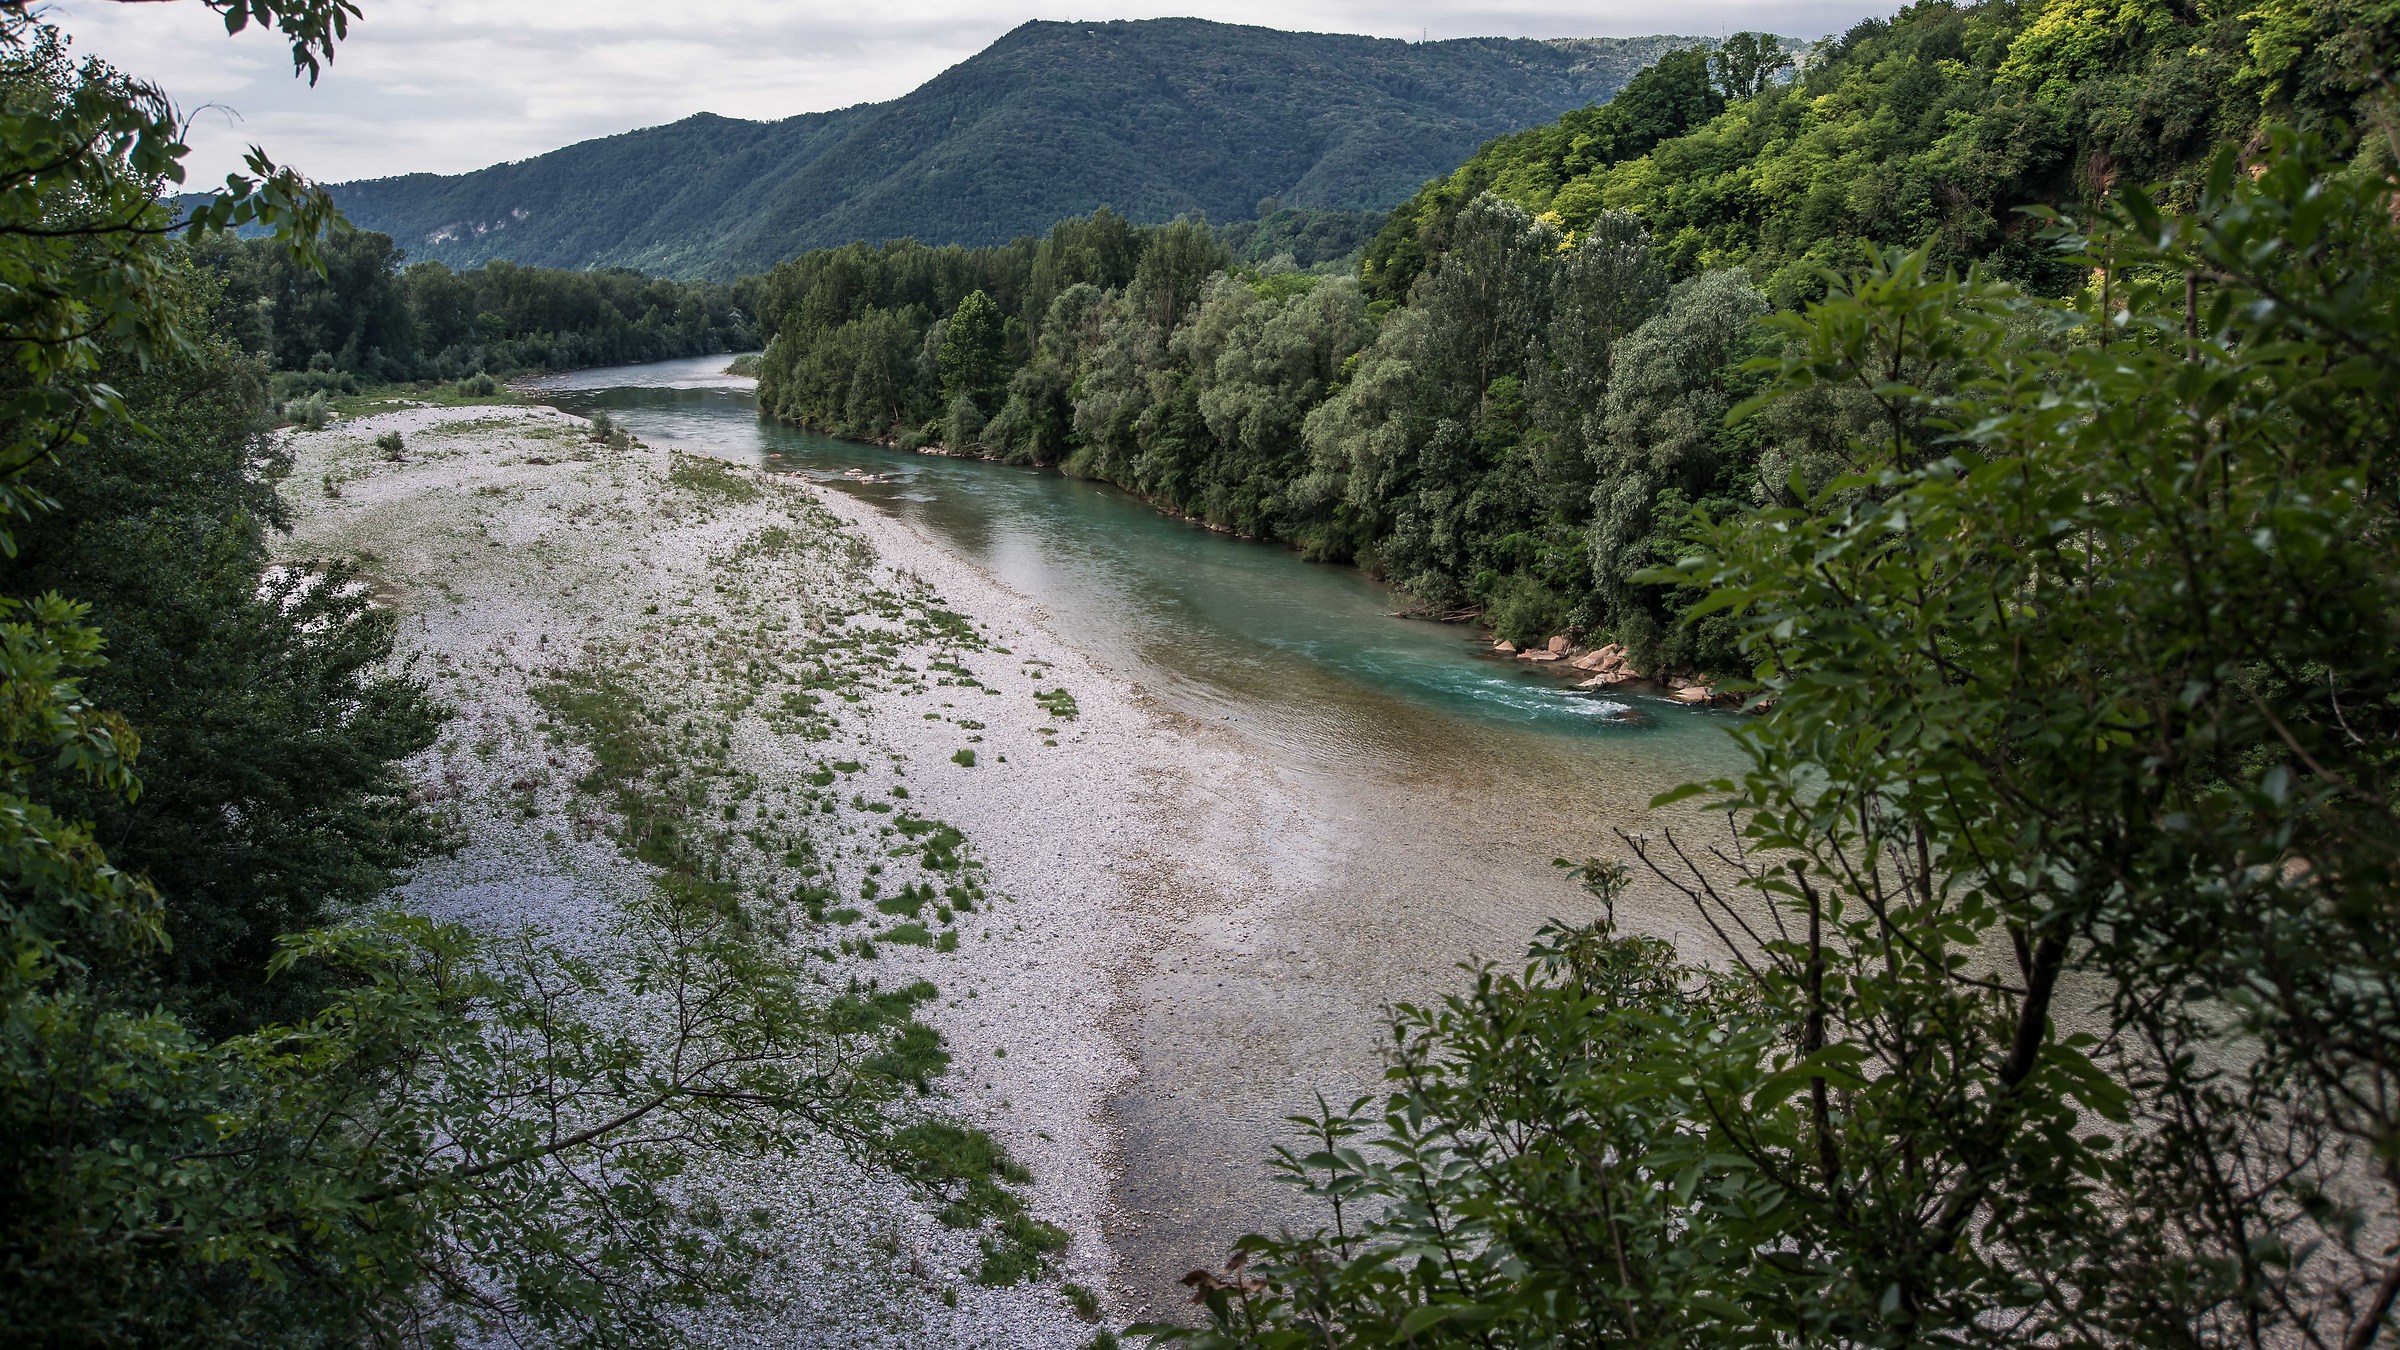 The Piave...